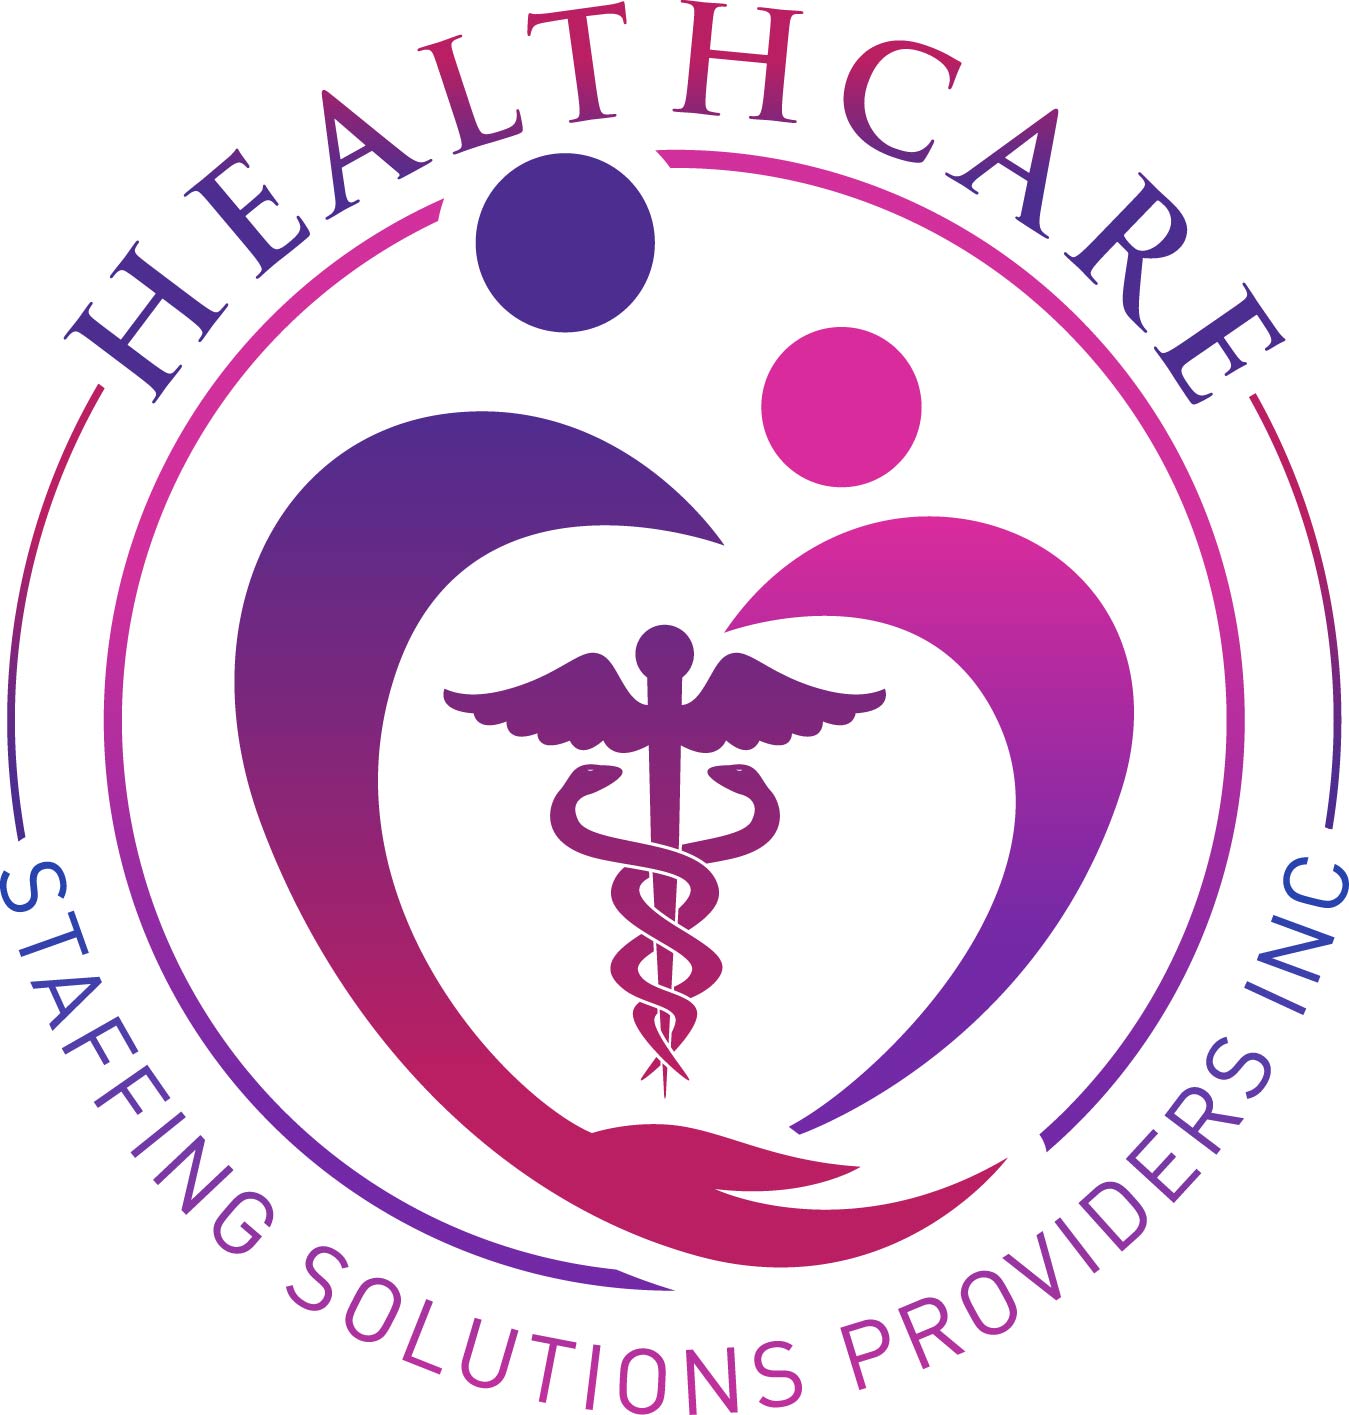 Healthcare Staffing Solutions Providers Inc.